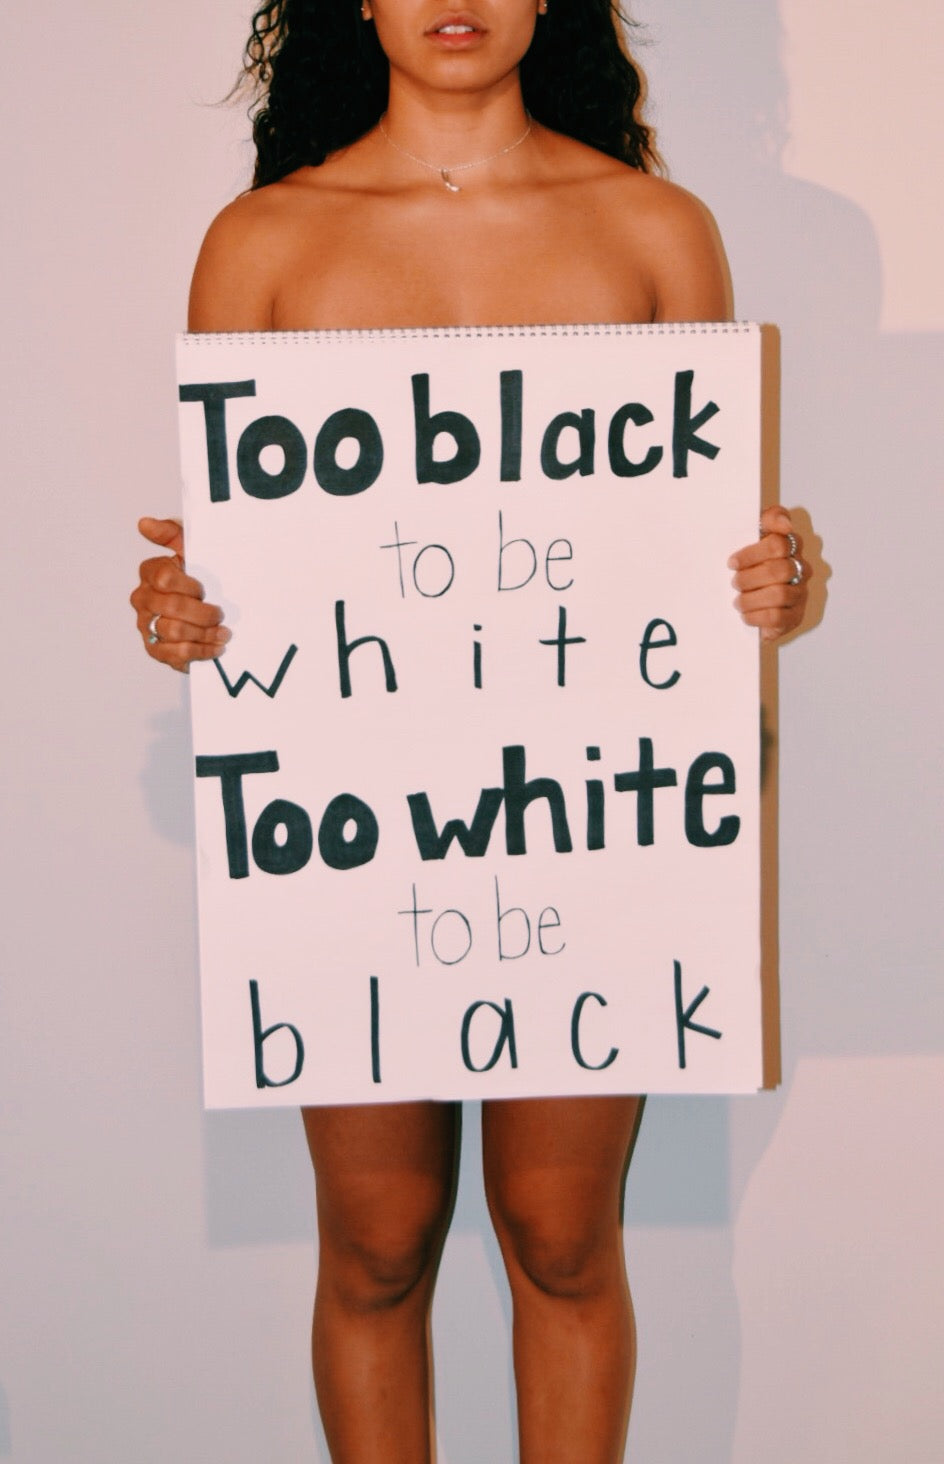 Uncut: Too Black to be White. Too White to be Black.